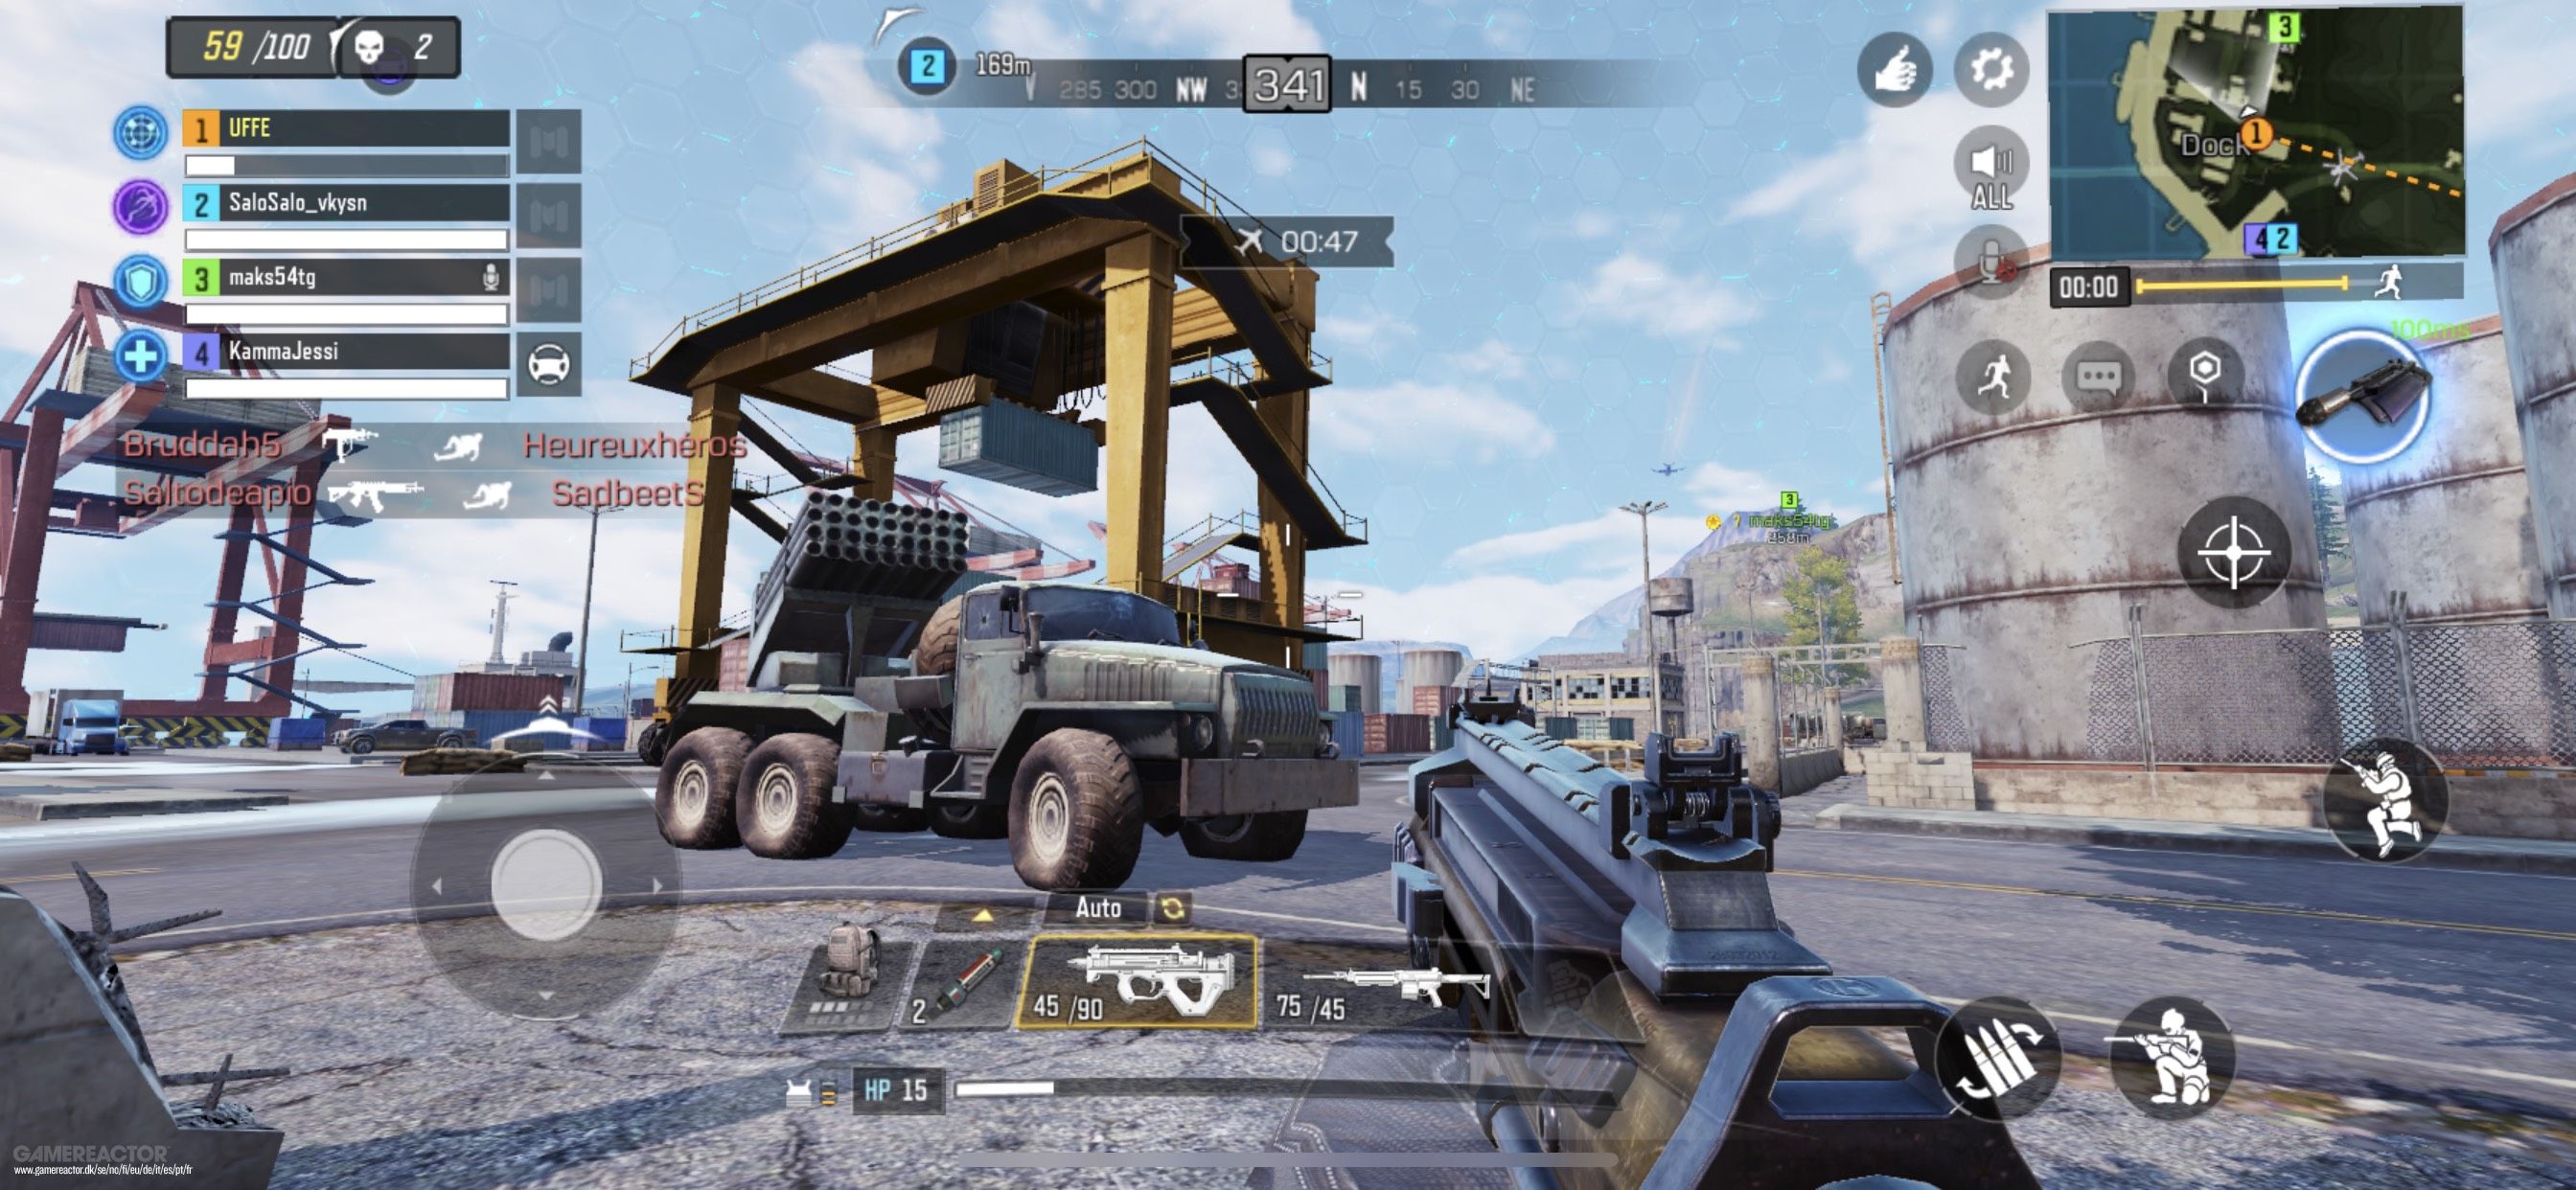 Call of Duty: Mobile Review - Gamereactor